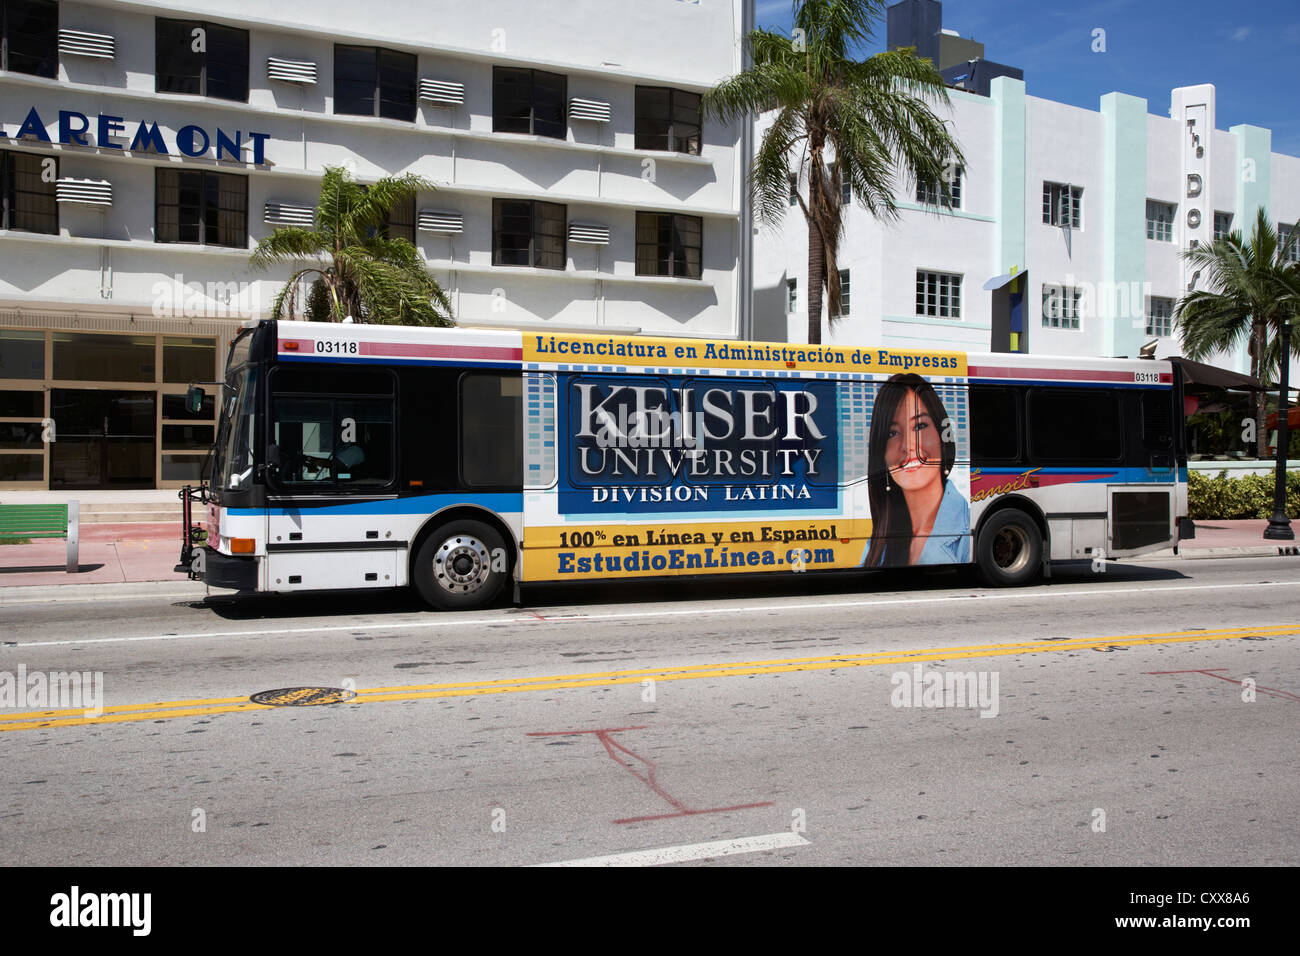 public bus transport with spanish speaking university advert on the side miami south beach florida usa Stock Photo